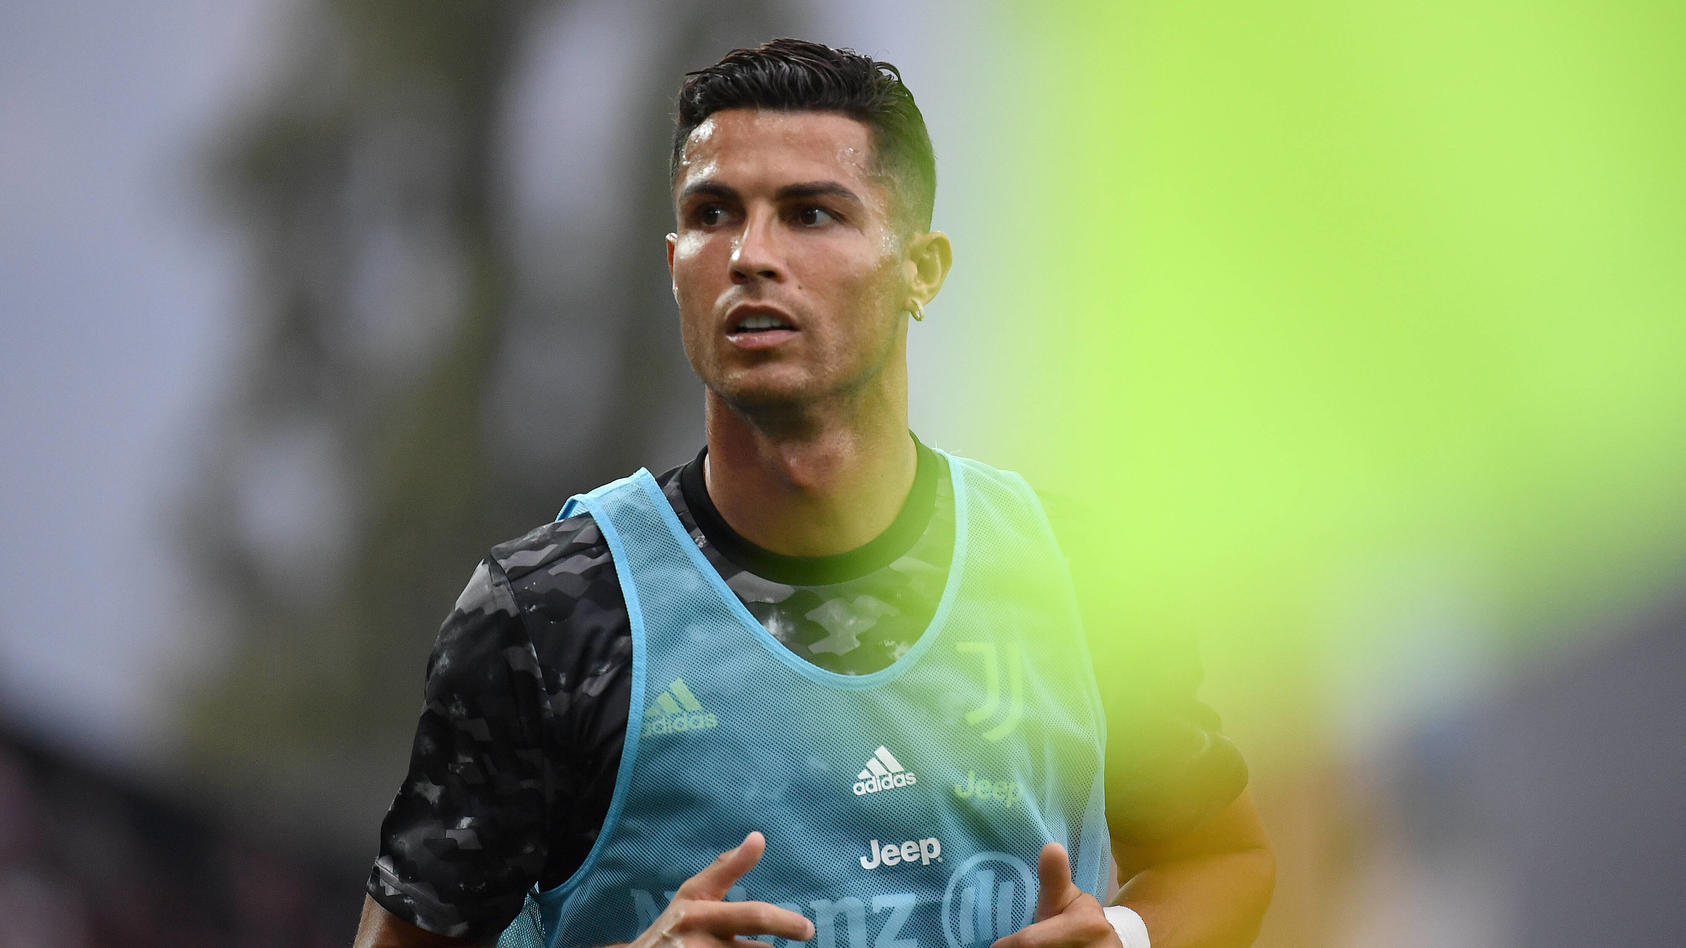  Cristiano Ronaldo of Juventus FC reacts as he warms up during the Serie A football match between Udinese Calcio and Juventus FC at stadio Friuli in Udine Italy, August 22th, 2021. Photo Federico Tardito / Insidefoto federicoxtardito